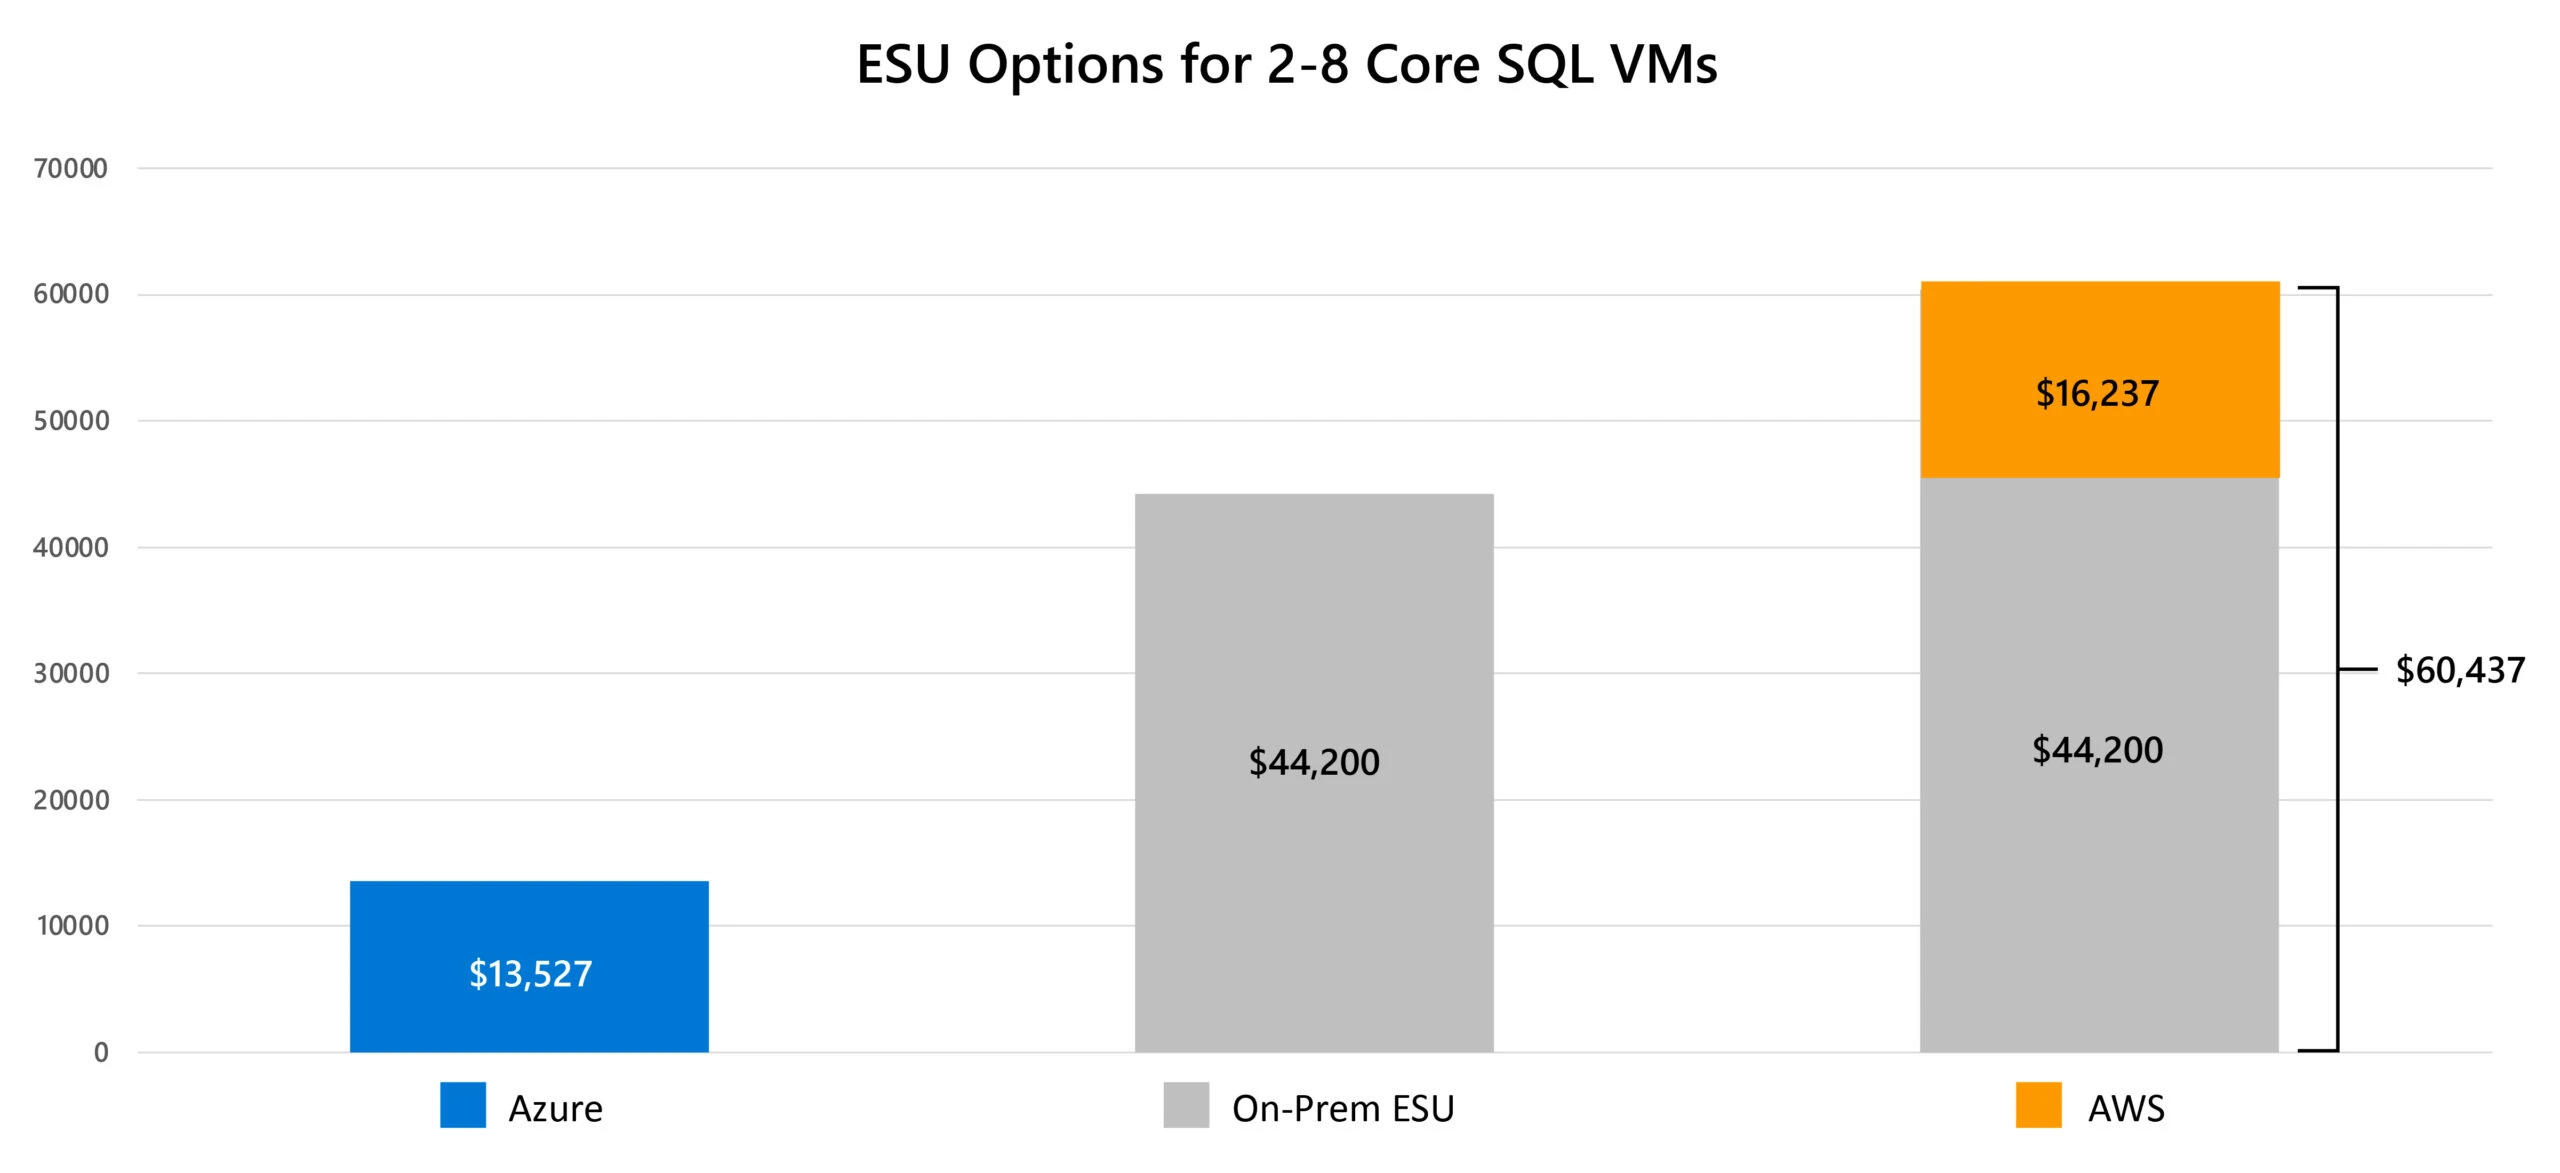 Moving your SQL Server VM’s to Azure Virtual Machines, saves $46,910 in the first year compared to purchasing Extended Security Updates and running on AWS. Running your SQL Server VMs on Azure with free Extended Security Updates compared to staying on premises purchasing Extended Security updates has a year one total savings of $30,673.